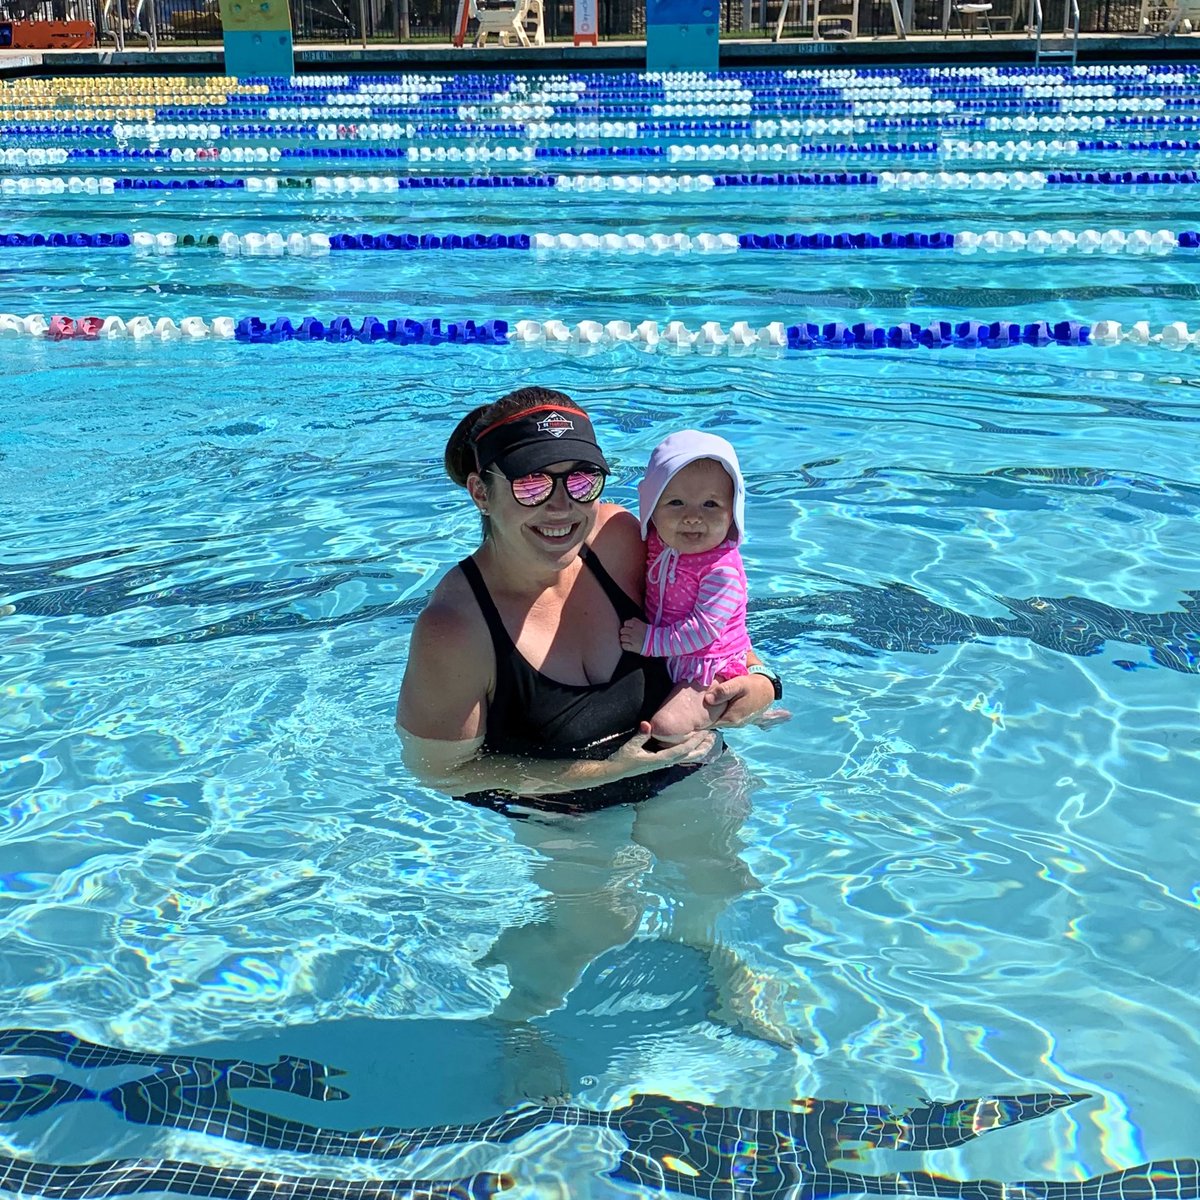 Happiness is a day at the pool! 💦
•
Baby and I went to our first mommy and me swim class today and it was so much fun! I was thankful for my @shadyrays that kept my eyes protected from the bright sun! ☀️ Who else spent some time in the pool today? 

#shadyraysbr #bibchat